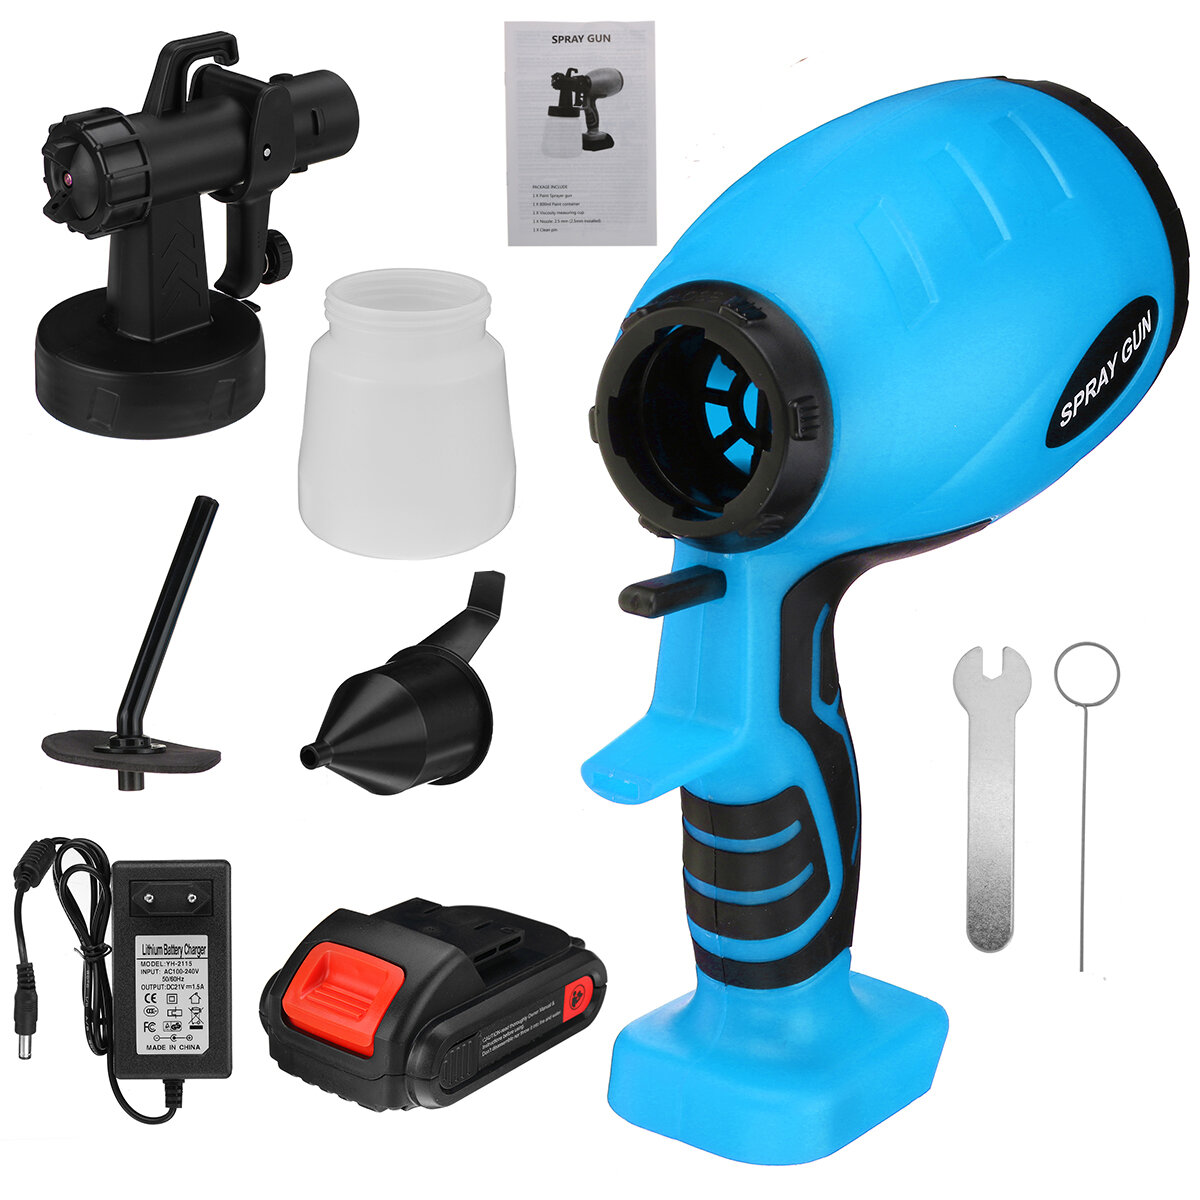 Image of 2000mAh Portable Electric Paint Sprayer Wireless Handheld Spray Guns Home Indoor Fence Painting Tool For Disinfection At